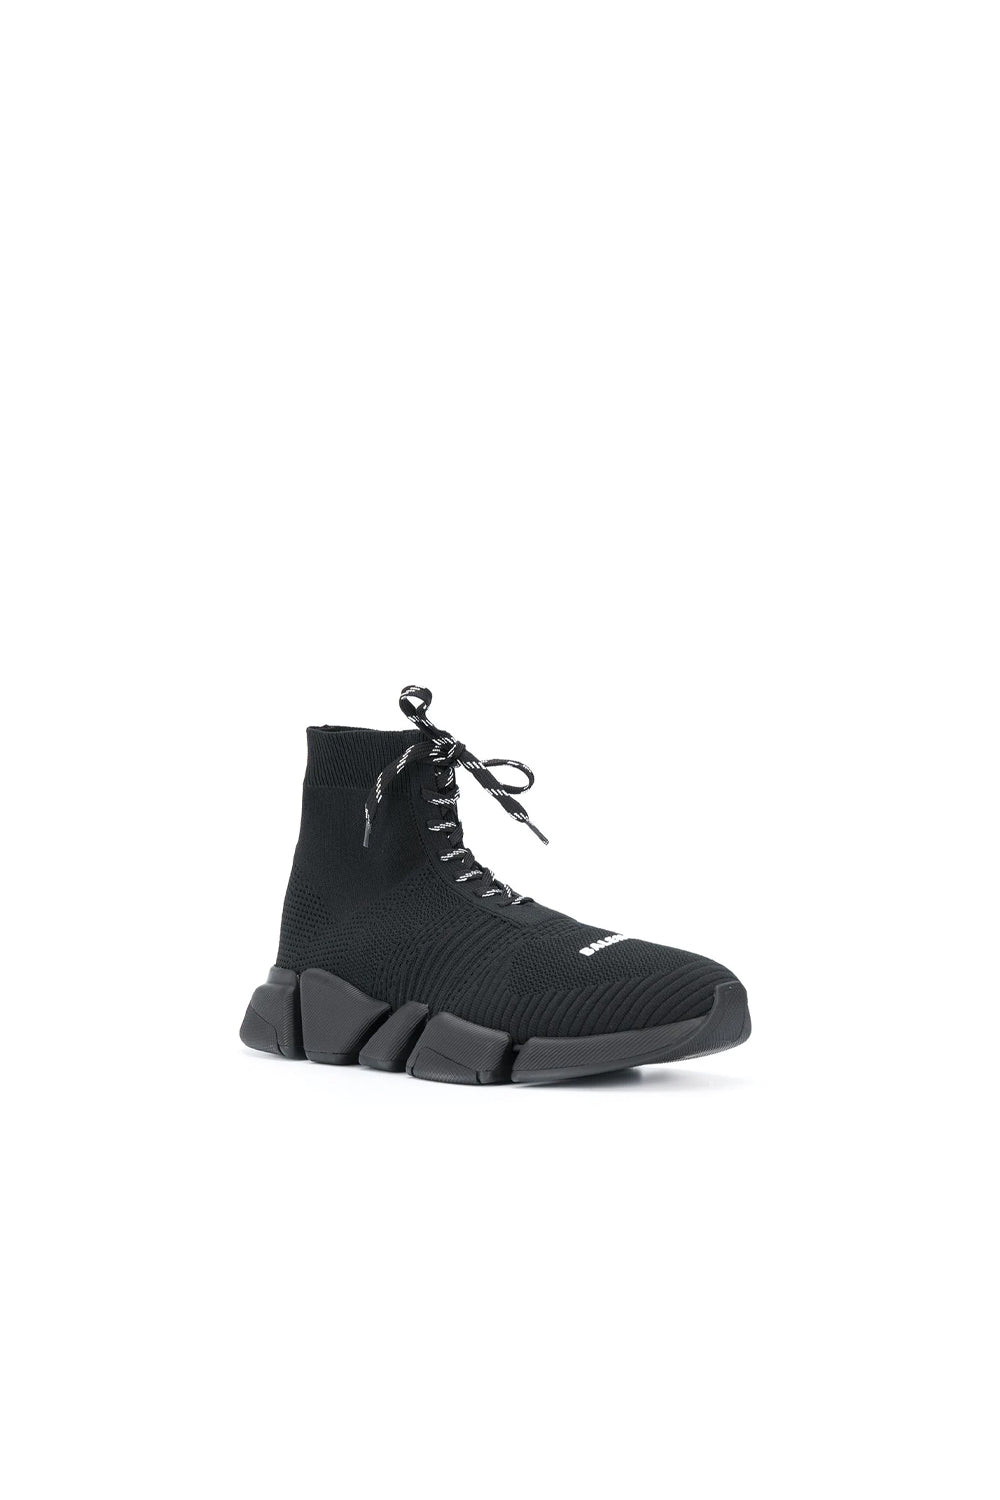 Balenciaga Speed 2 lace-up sneakers